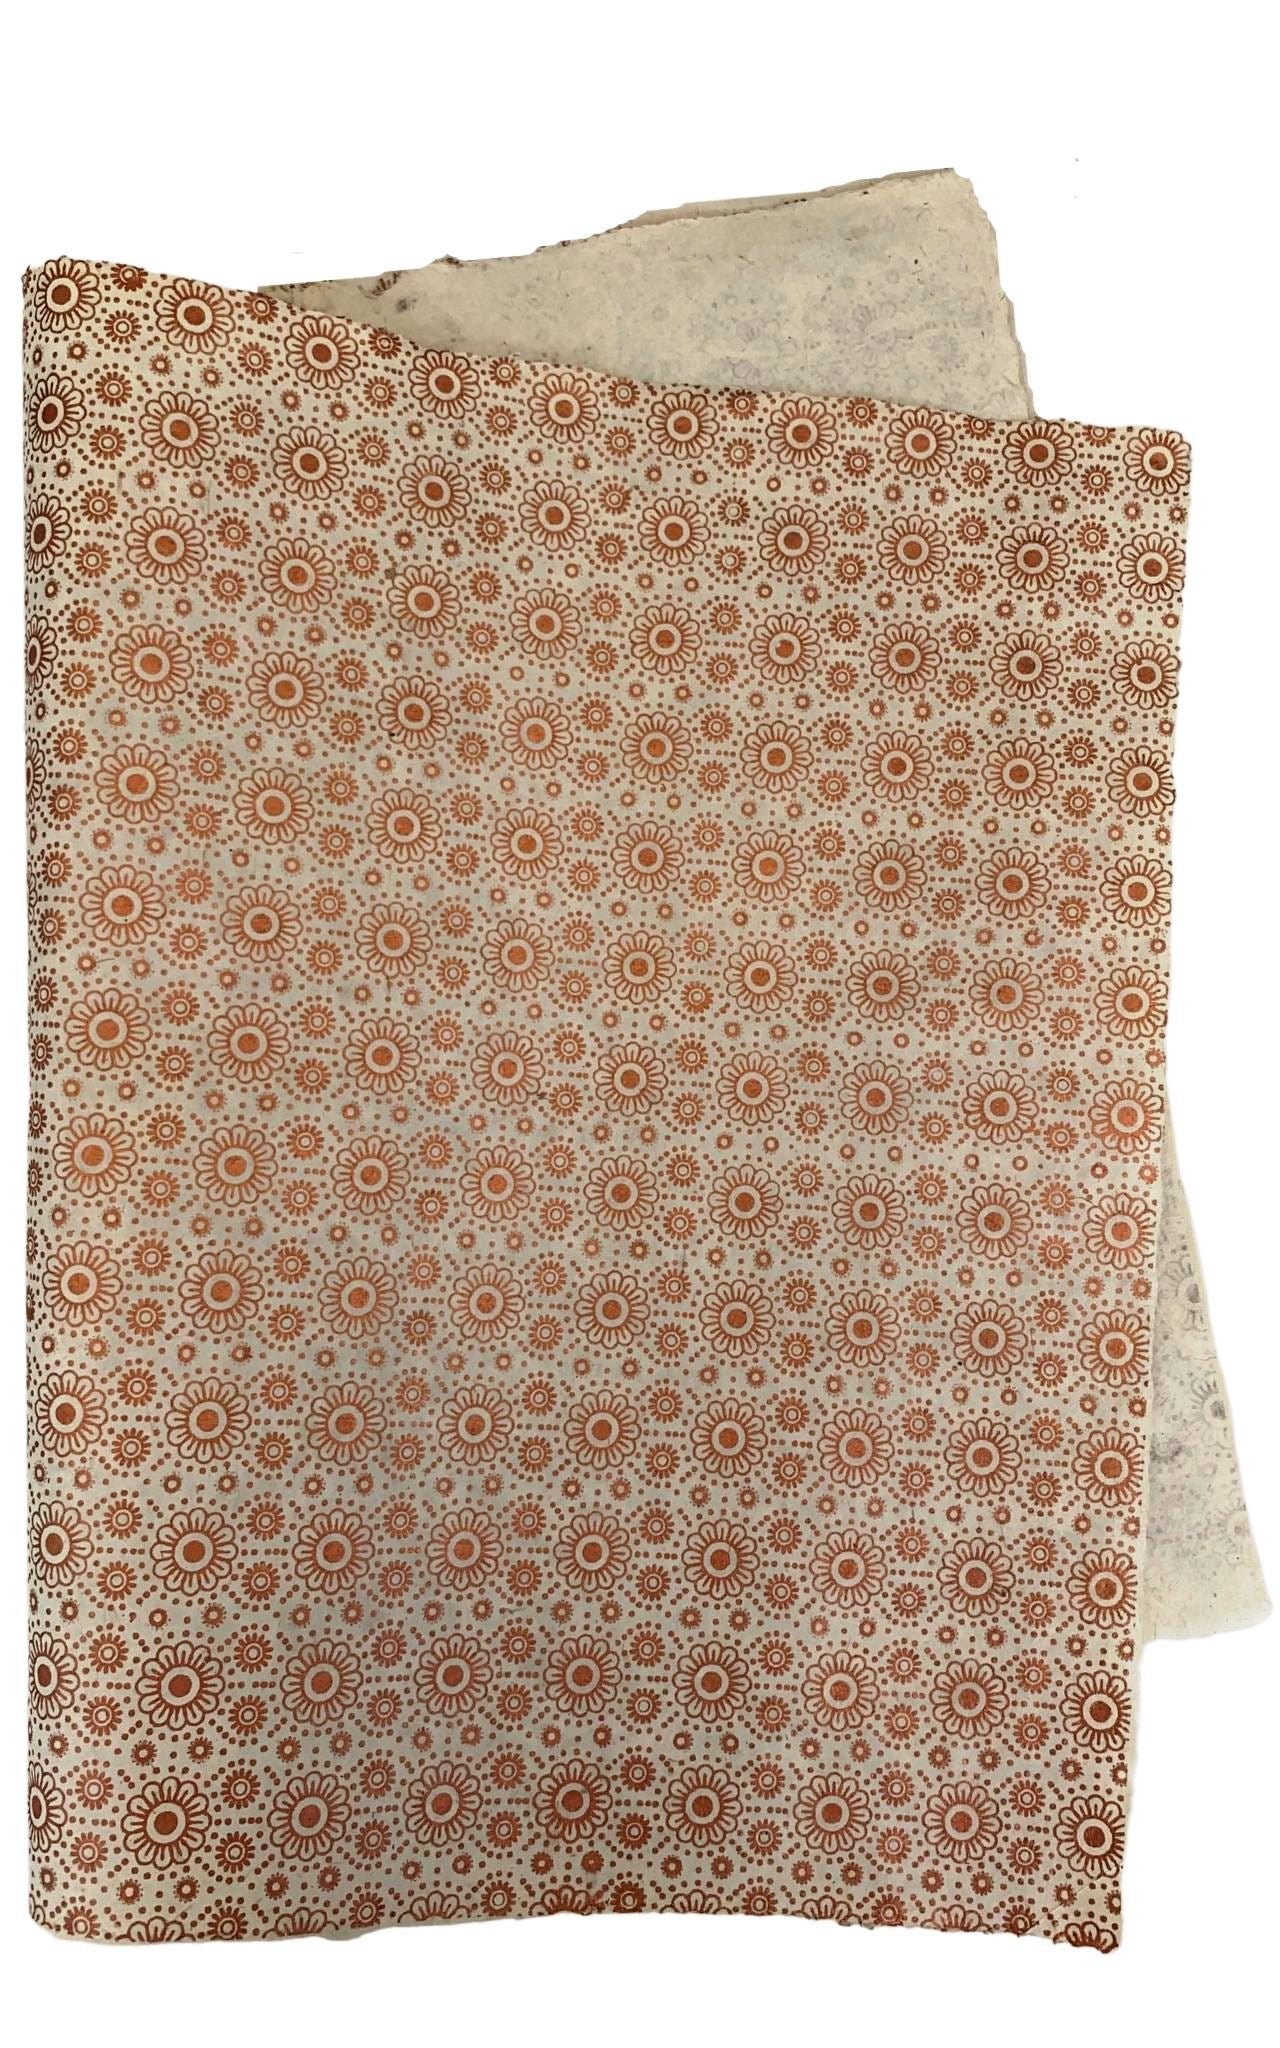 Surya Australia Sustainable Lokta paper Sheets from Nepal - Copper Flower